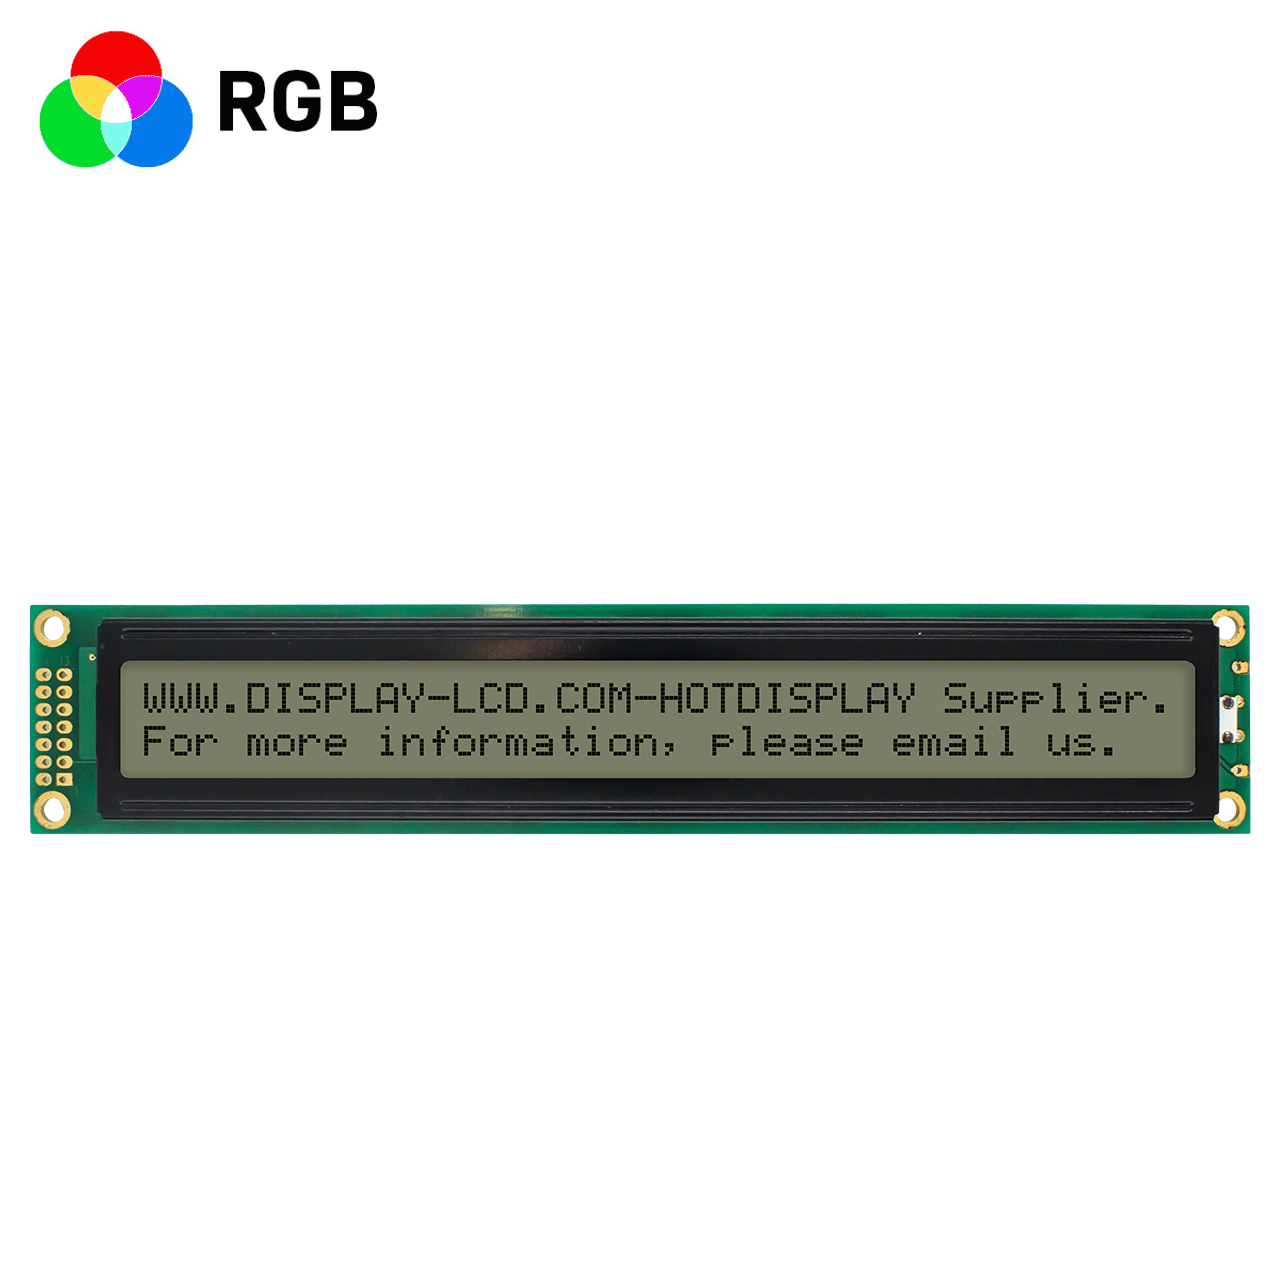 5.0v | 2X40 character monochrome LCD | FSTN positive display | with RGB red, green and blue backlight | Arduino display